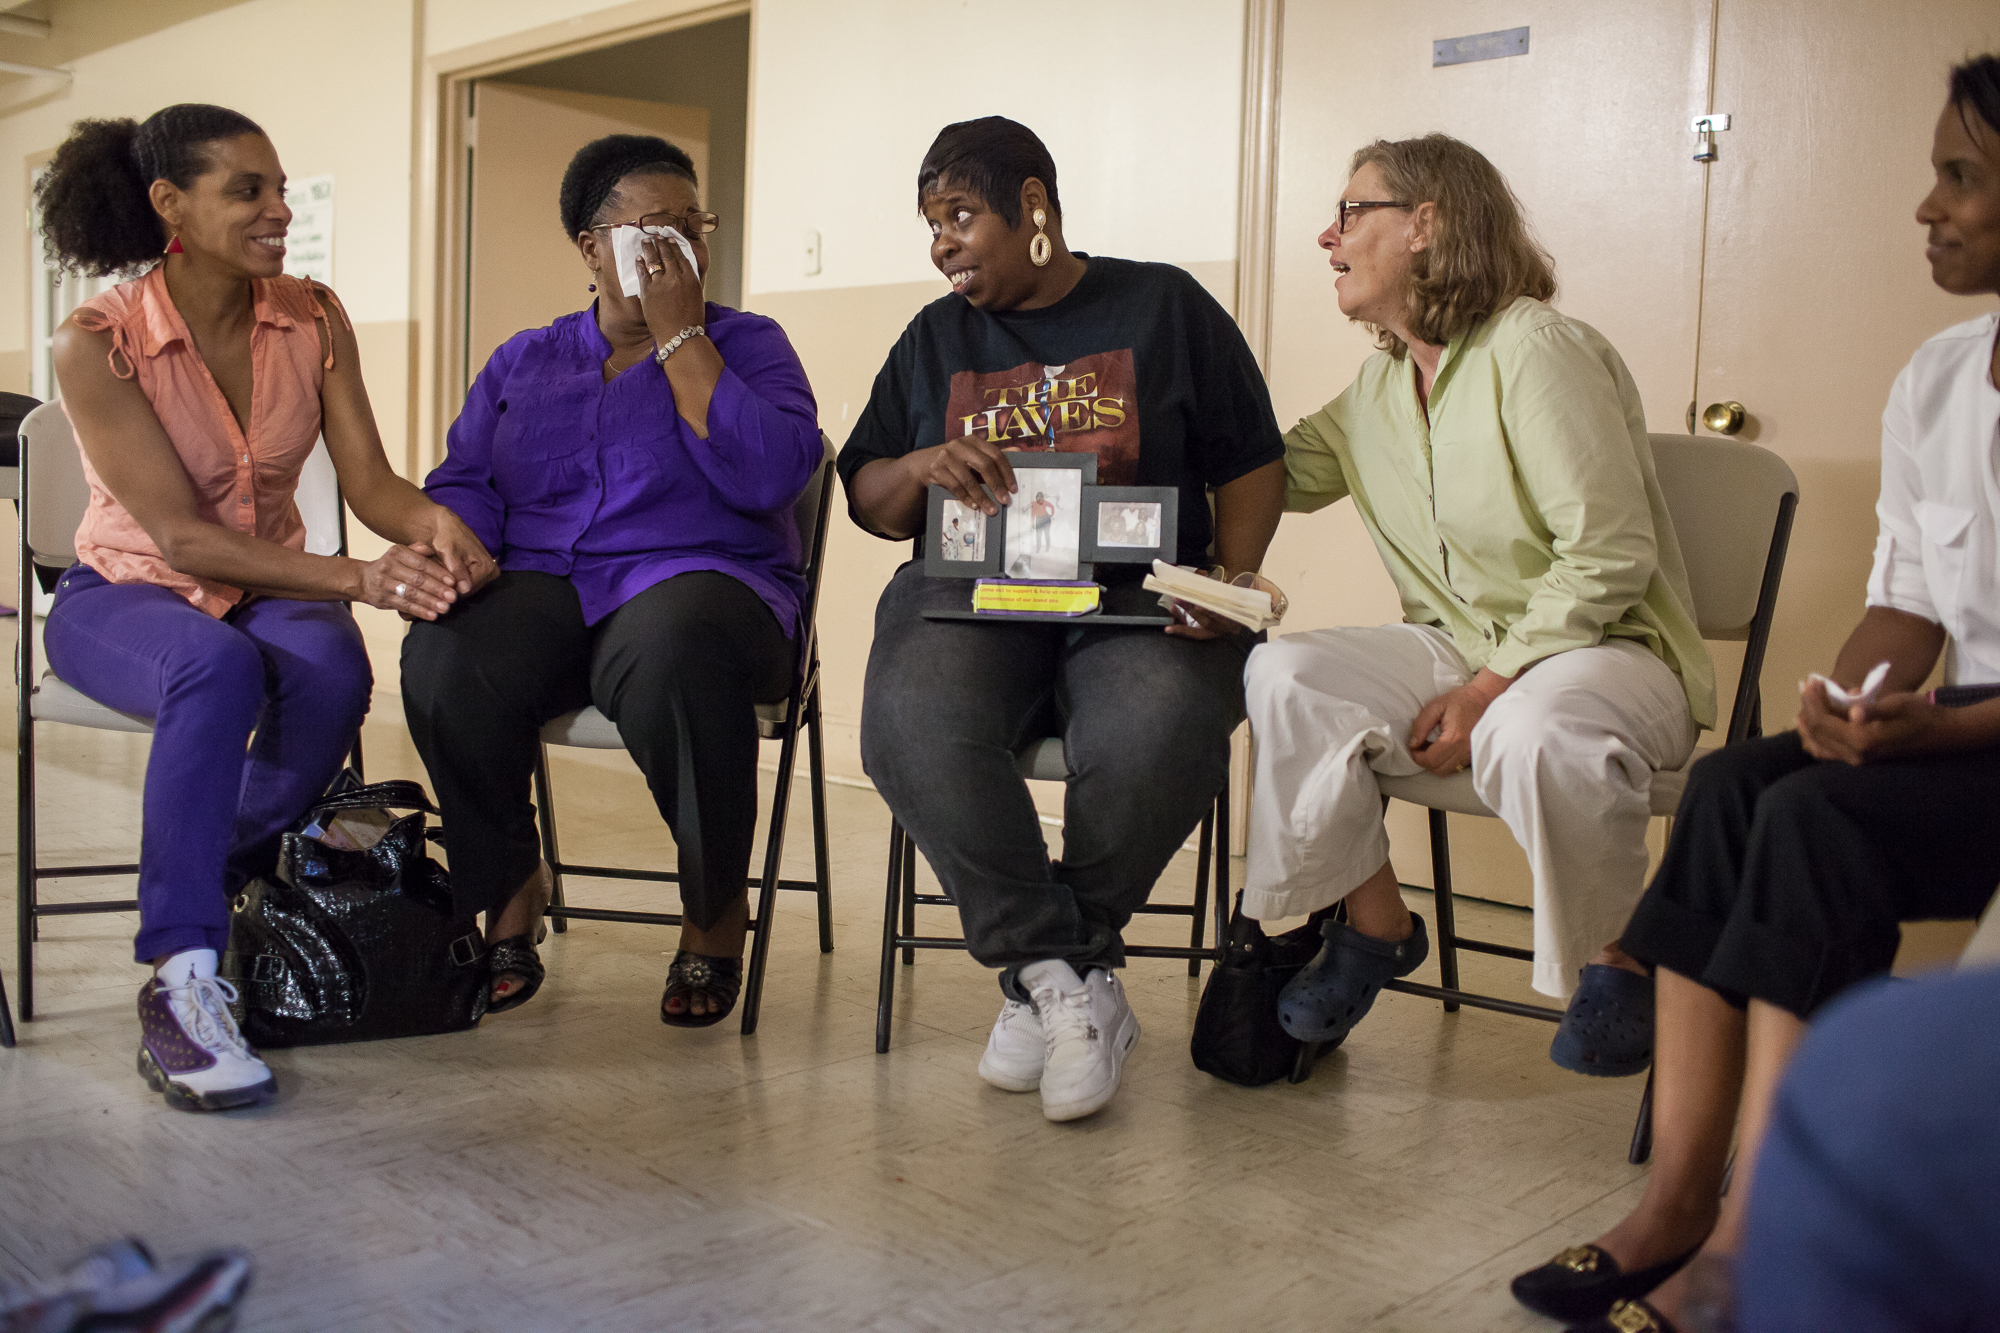  Community is formed from grief as mothers laugh and weep when they remember their murdered sons and daughters during a meeting of the Circle of Hope and Healing. The meetings are held for grieving parents by The Religious Coalition for a Nonviolent 